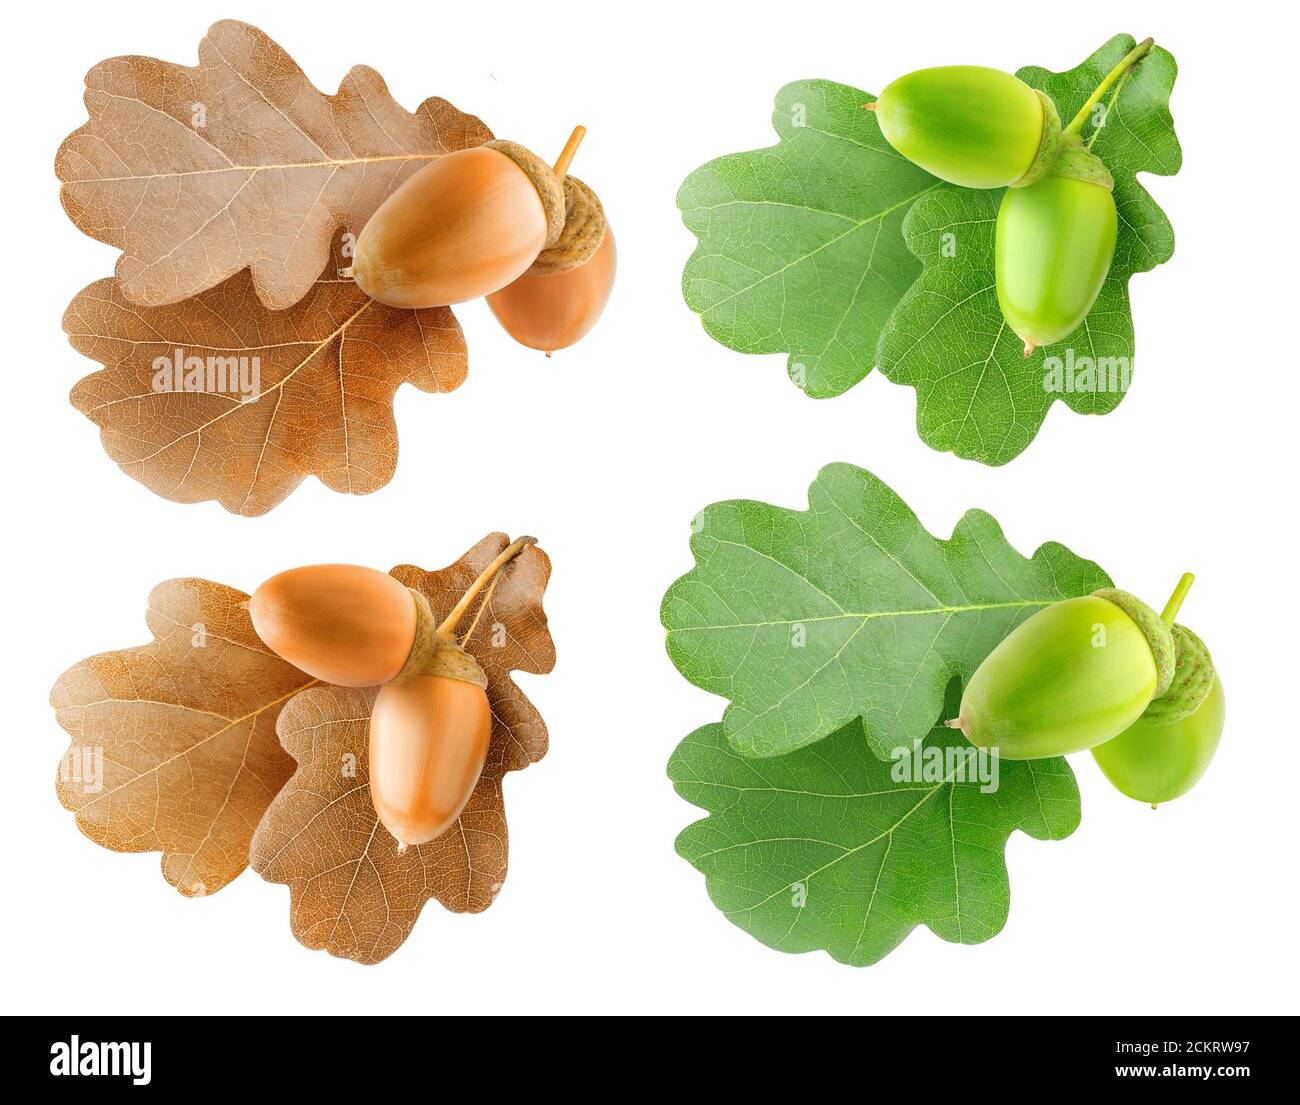 Isolated oak tree branchlets. Summer and autumn oak tree leaves and acorns isolated collection on white background Stock Photo